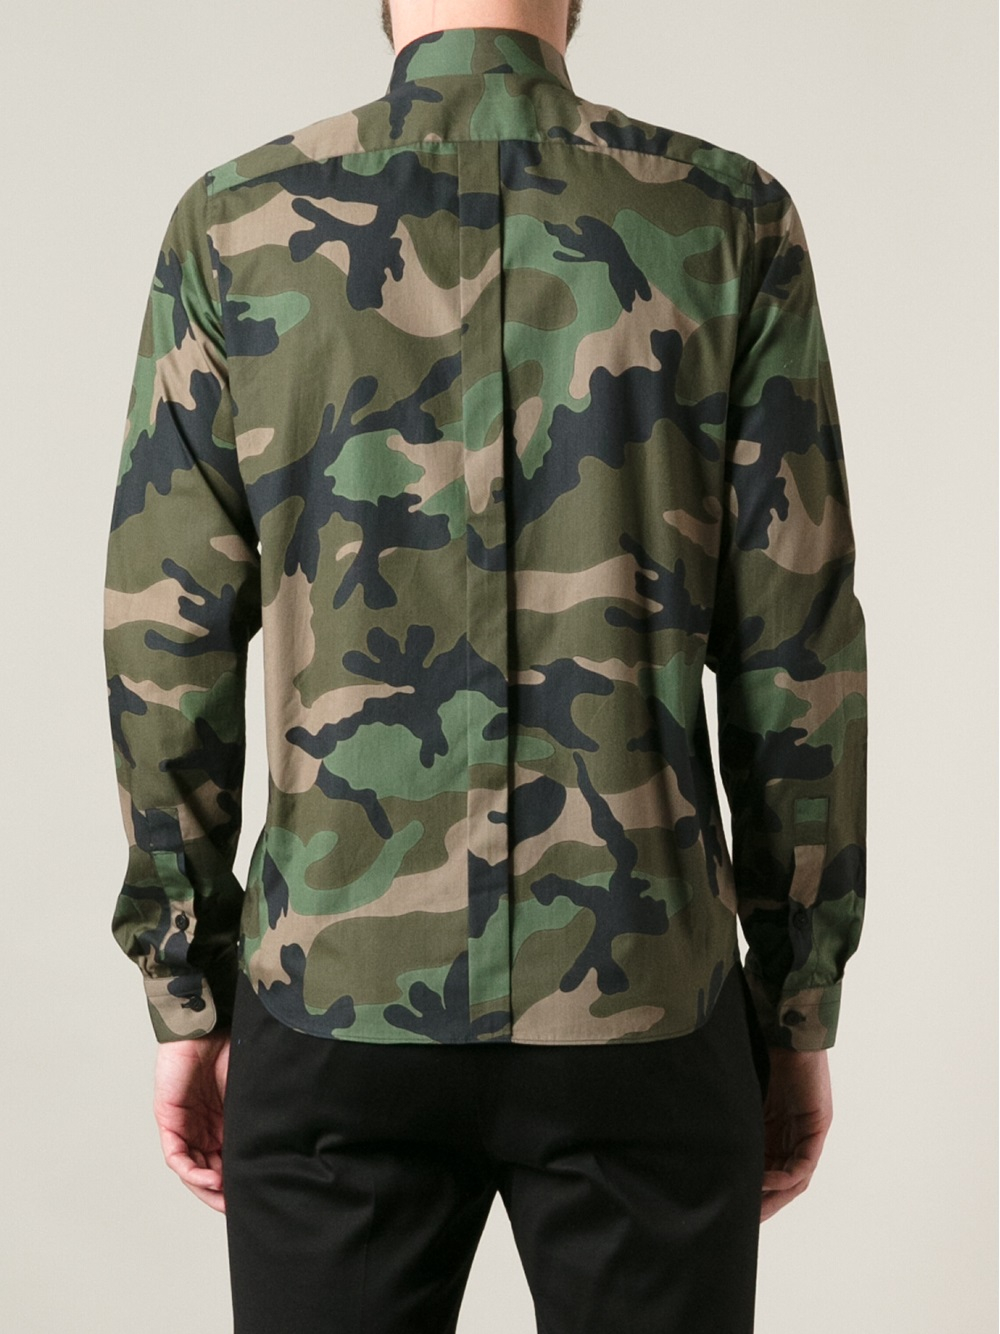 Lyst - Valentino Camouflage Print Shirt in Green for Men